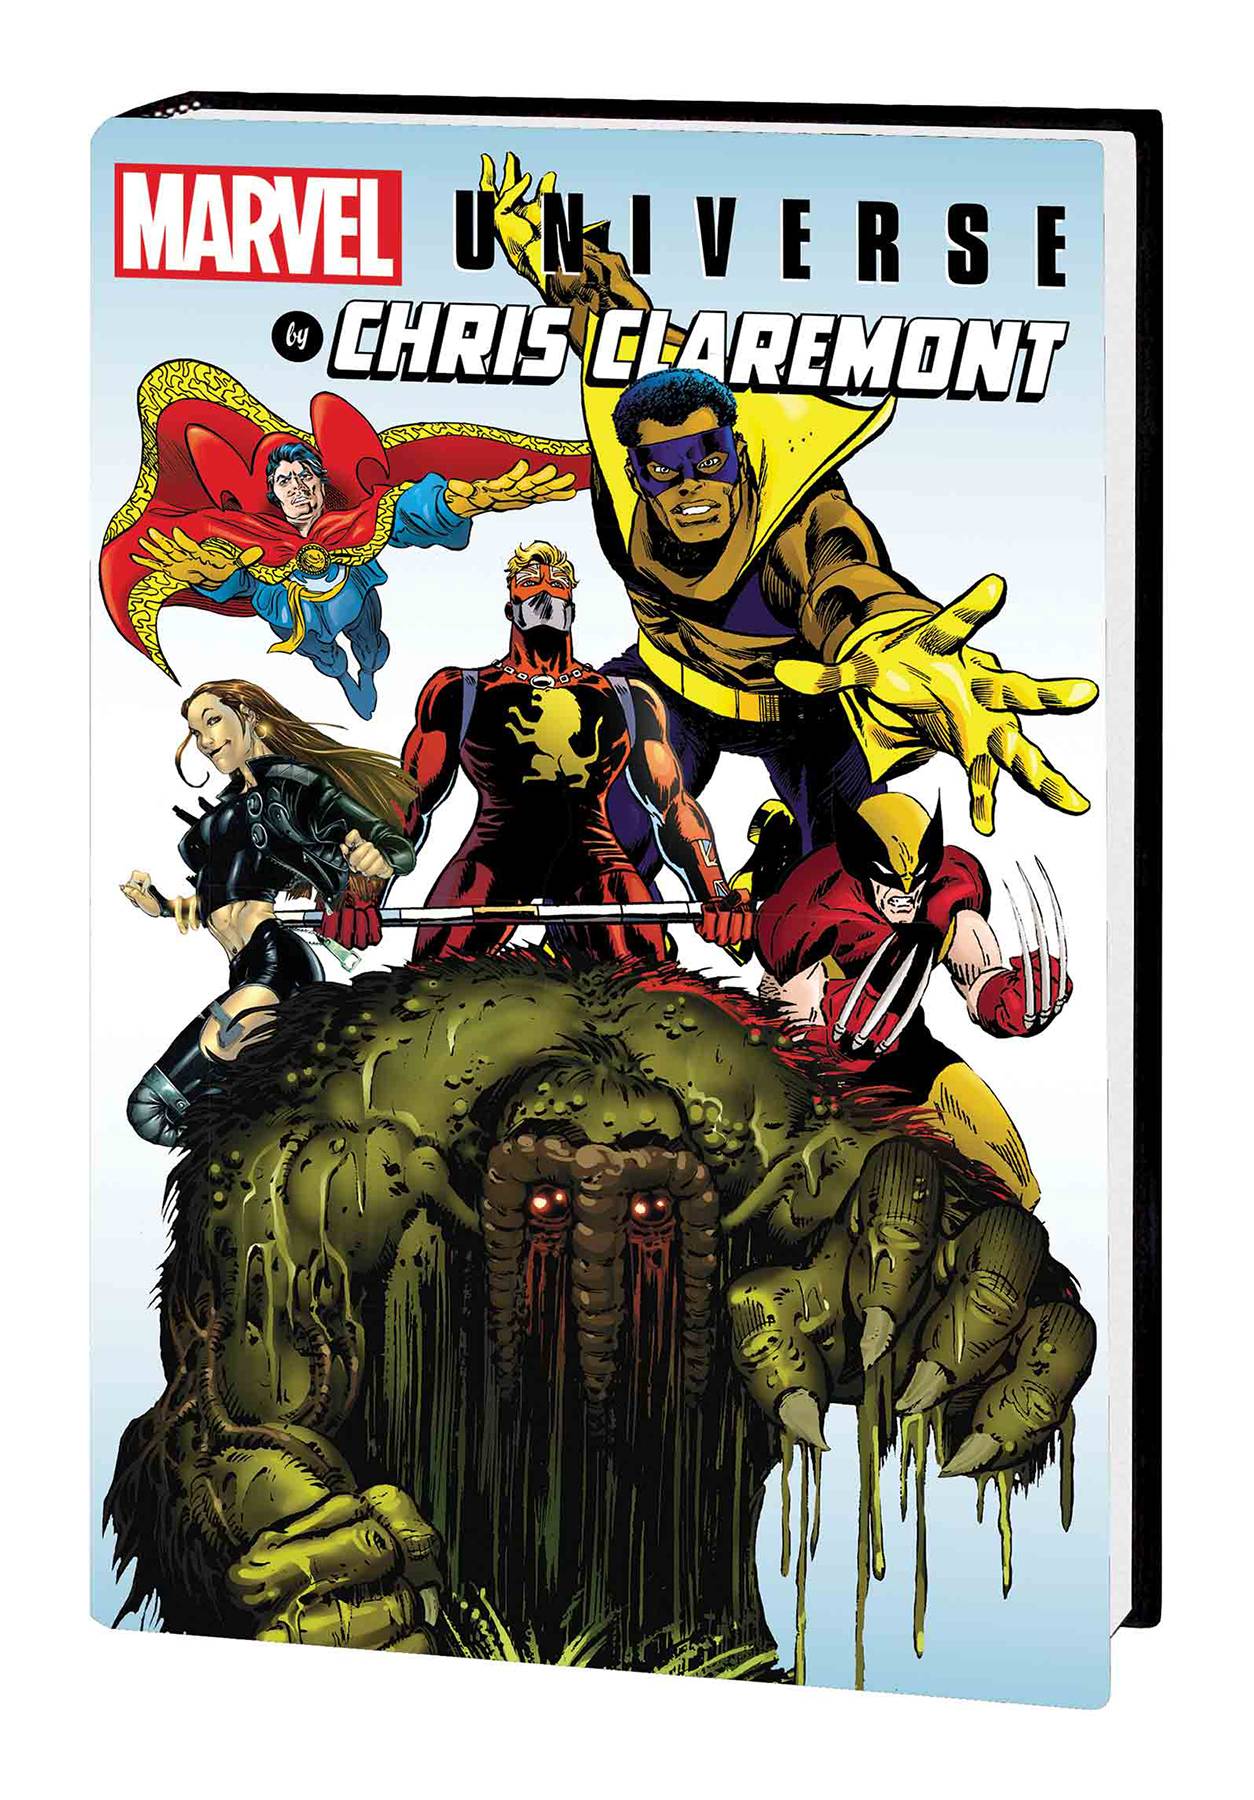 FEB170973 - MARVEL UNIVERSE BY CHRIS CLAREMONT HC - Previews World